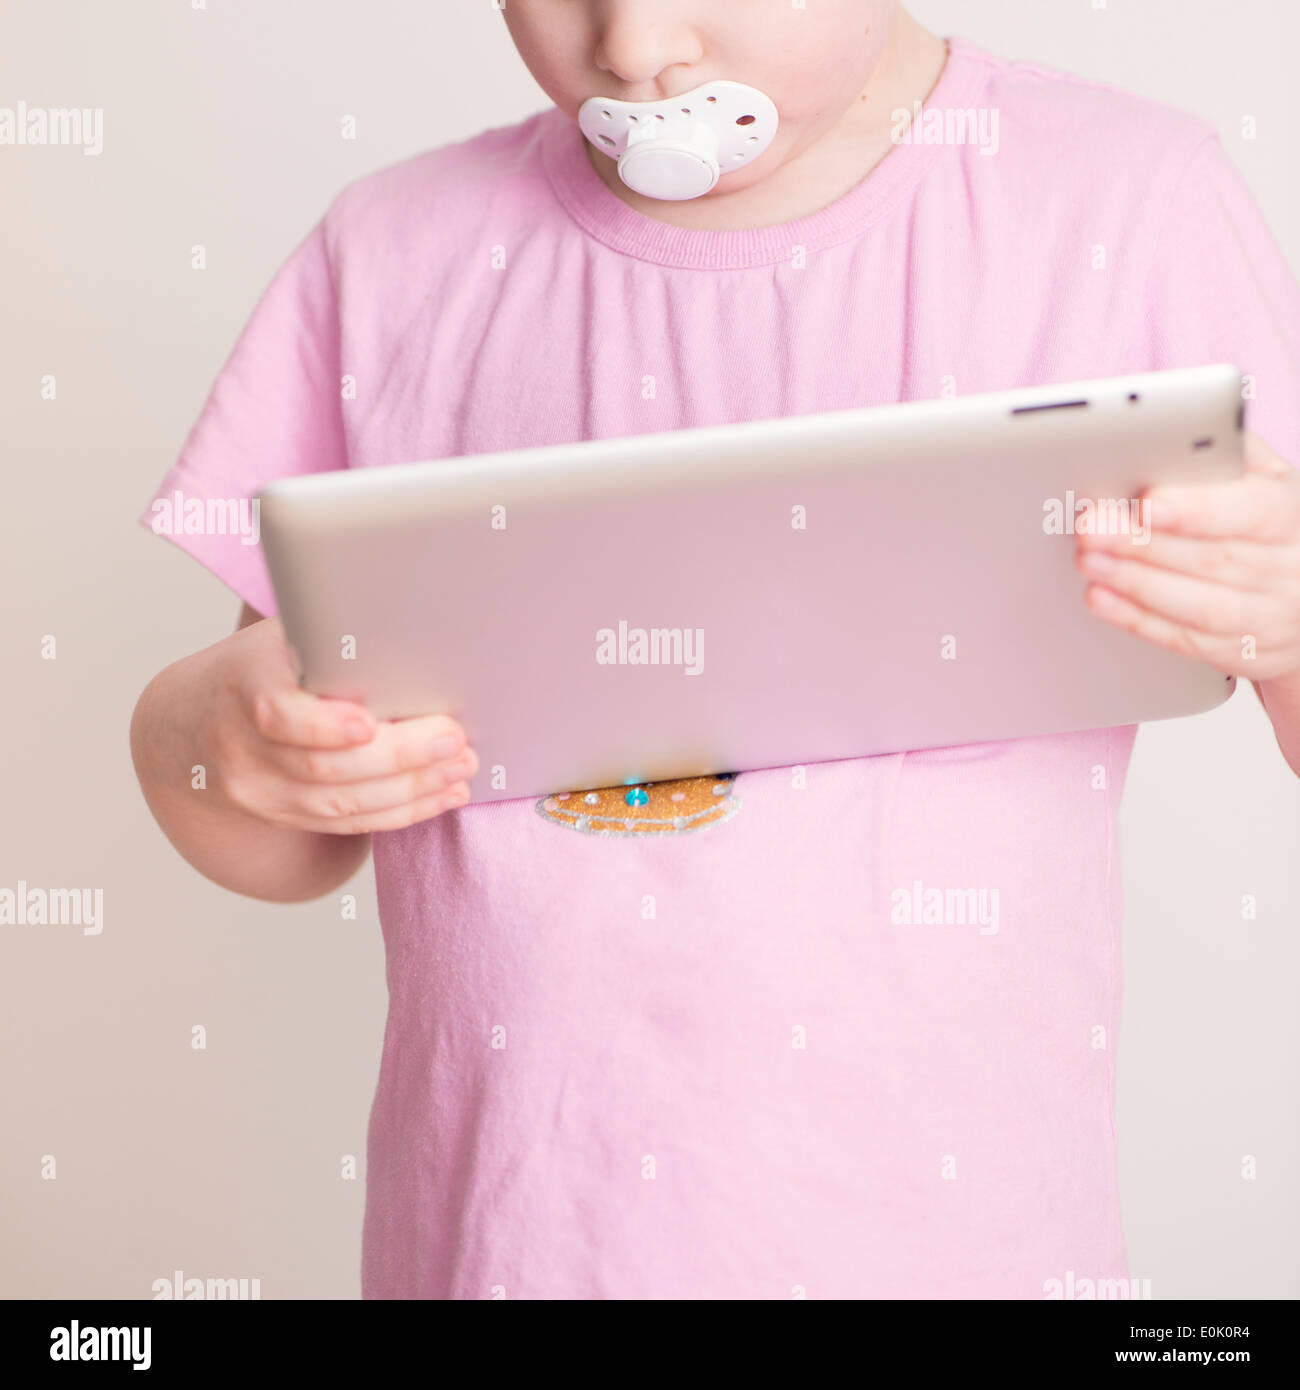 Little girl, 4 years old, holding and using tablet computer in her home. Stock Photo